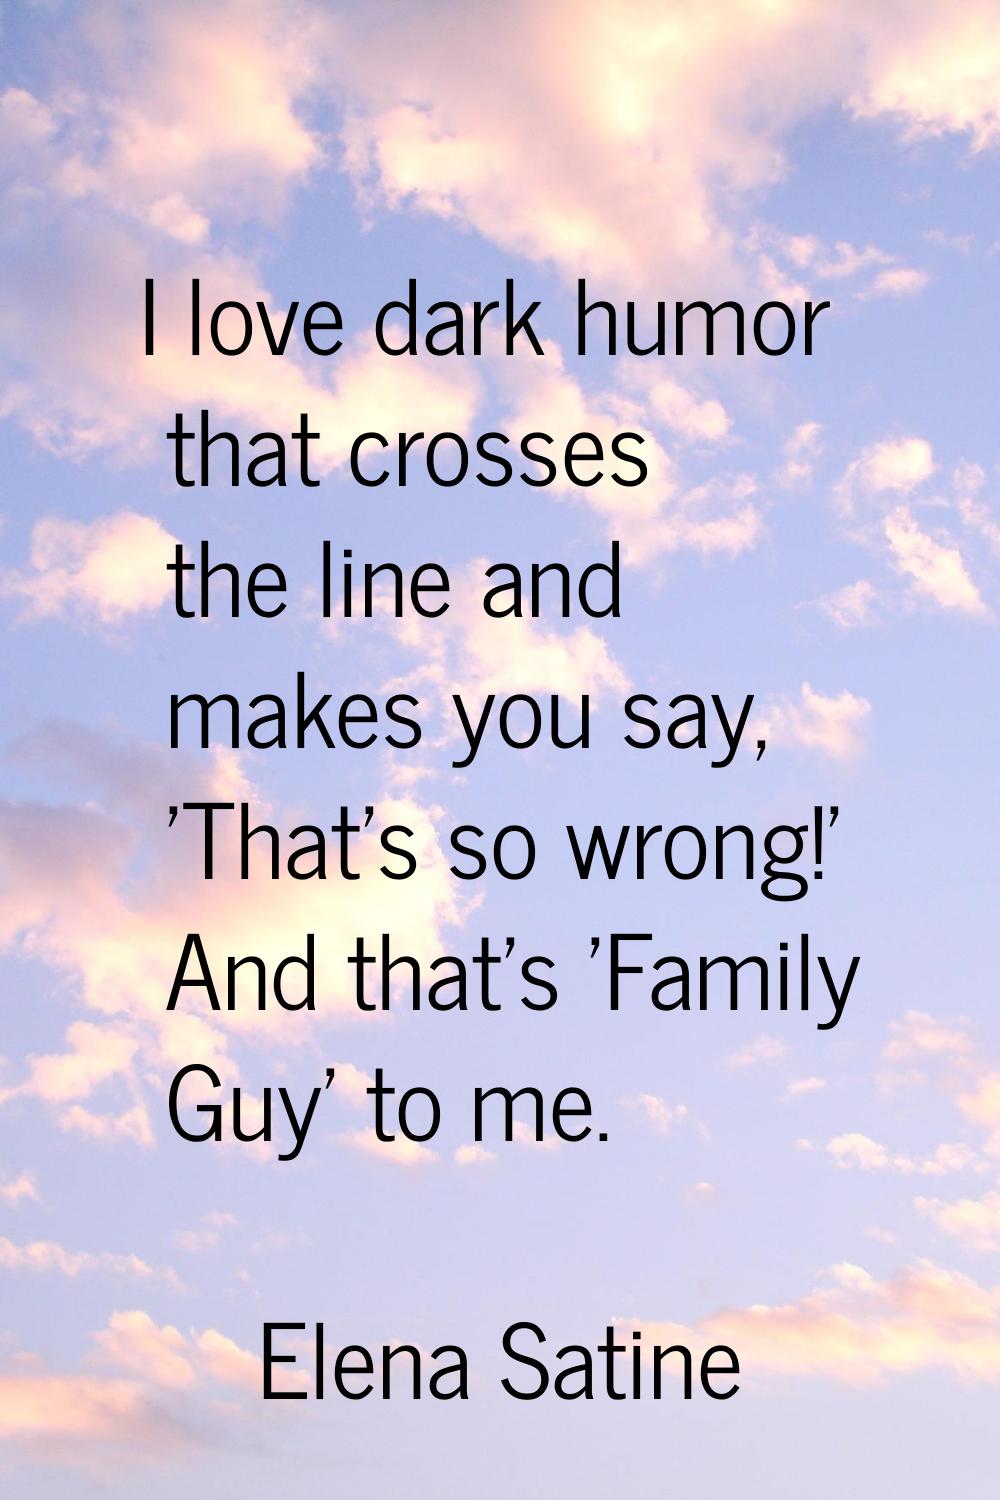 I love dark humor that crosses the line and makes you say, 'That's so wrong!' And that's 'Family Gu